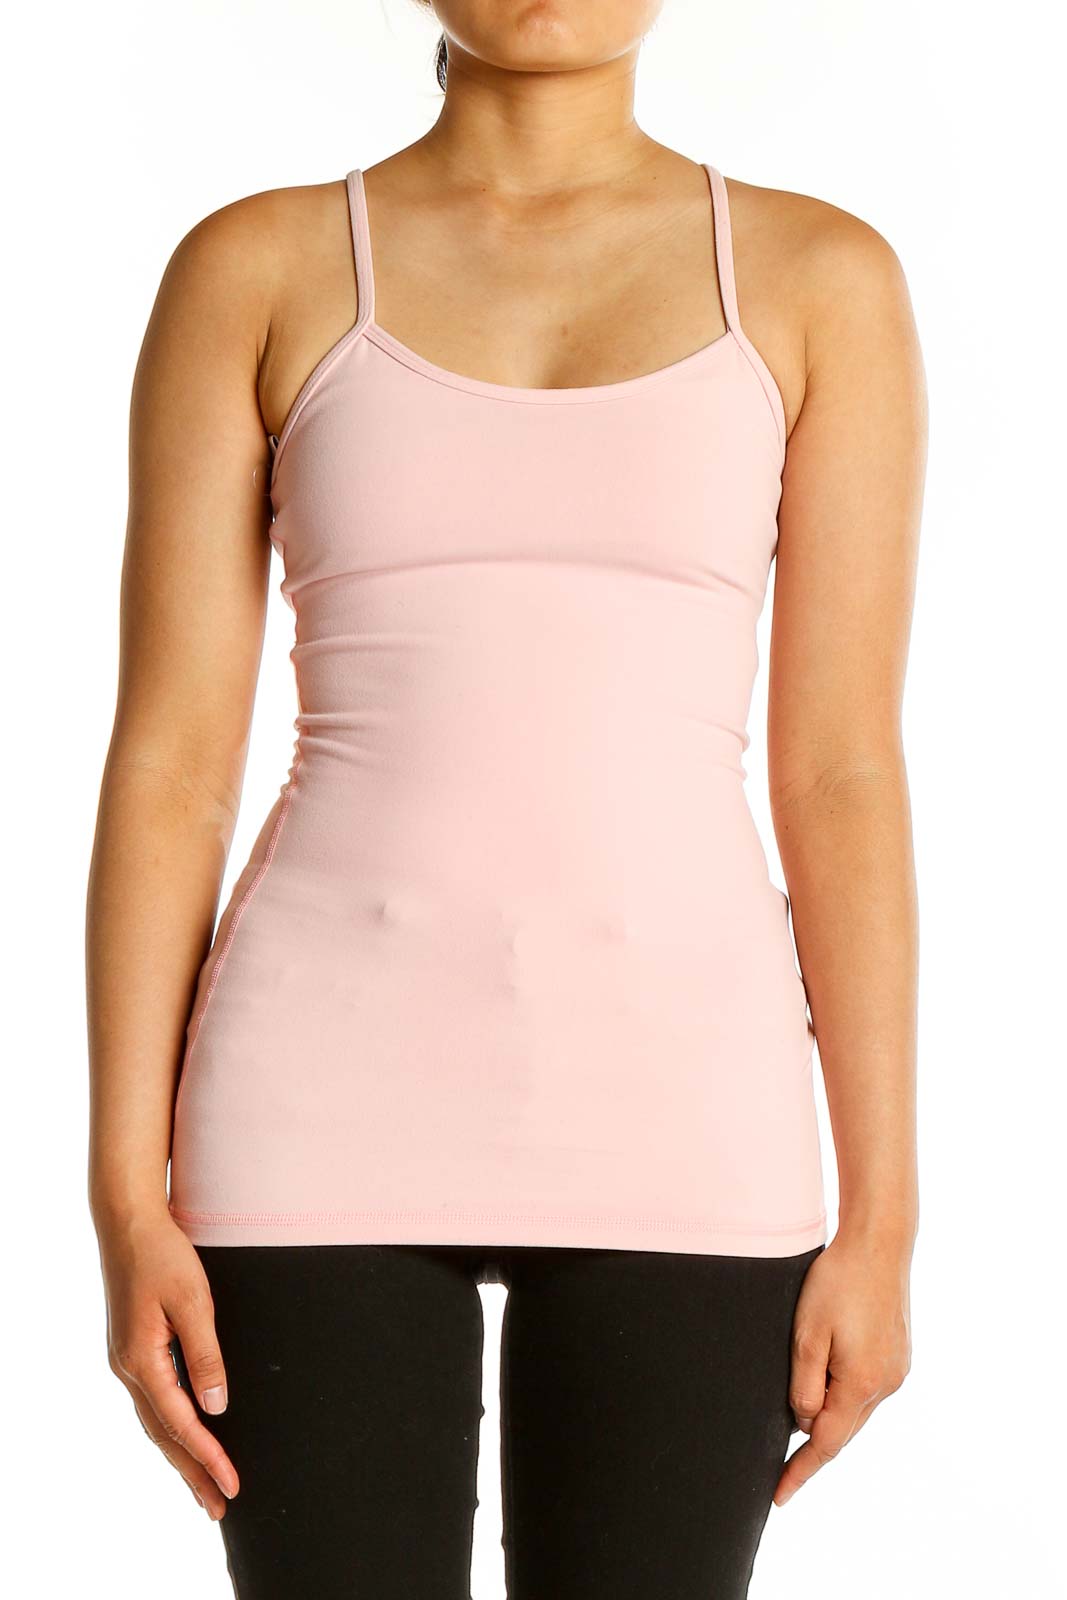 Baby Pink Yoga Top Front